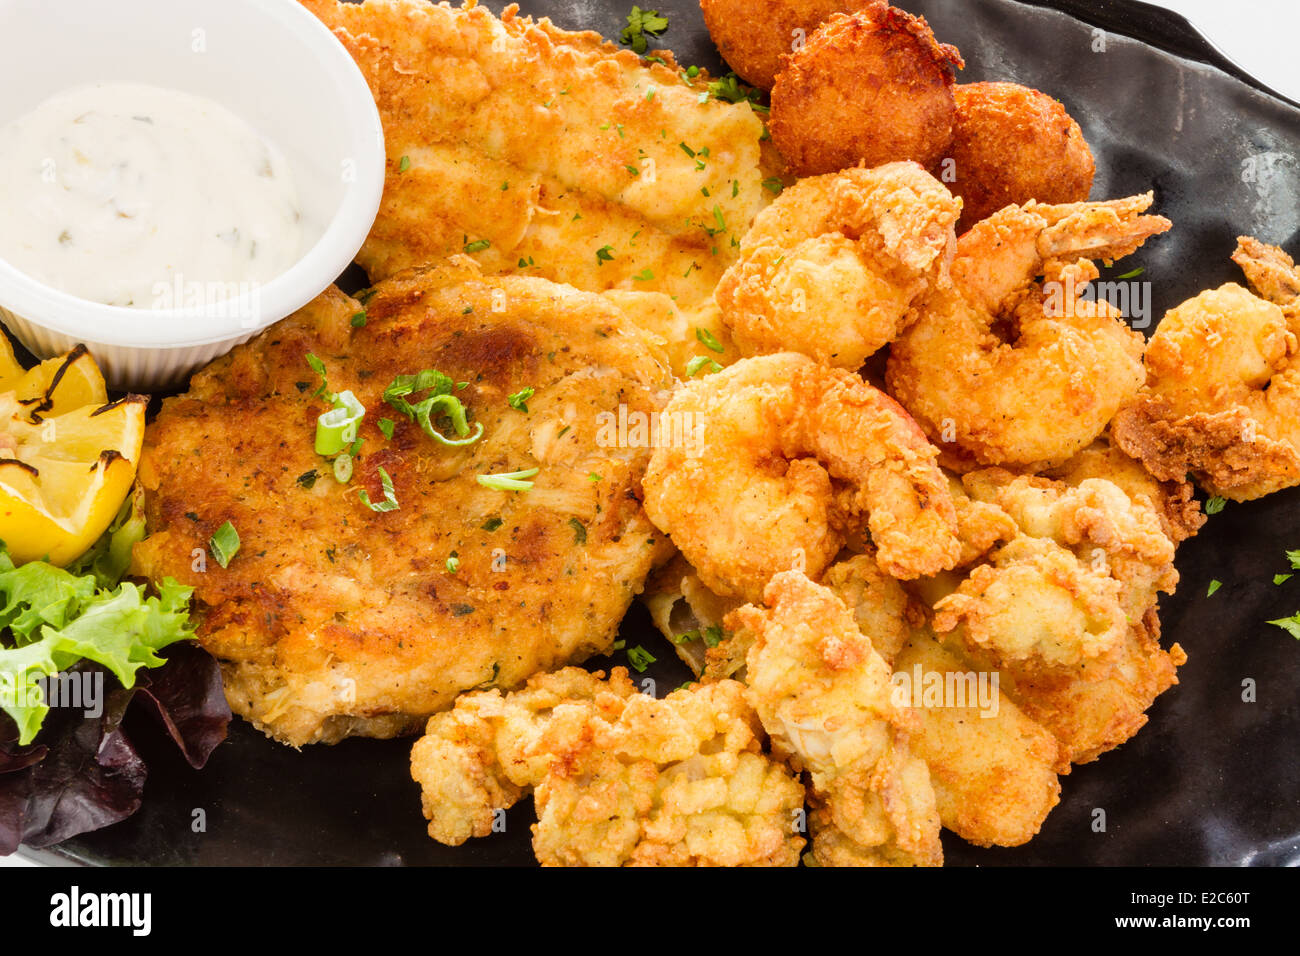 Fried platter with fish, shrimp, oysters, hush puppies, and a crab cake Stock Photo -